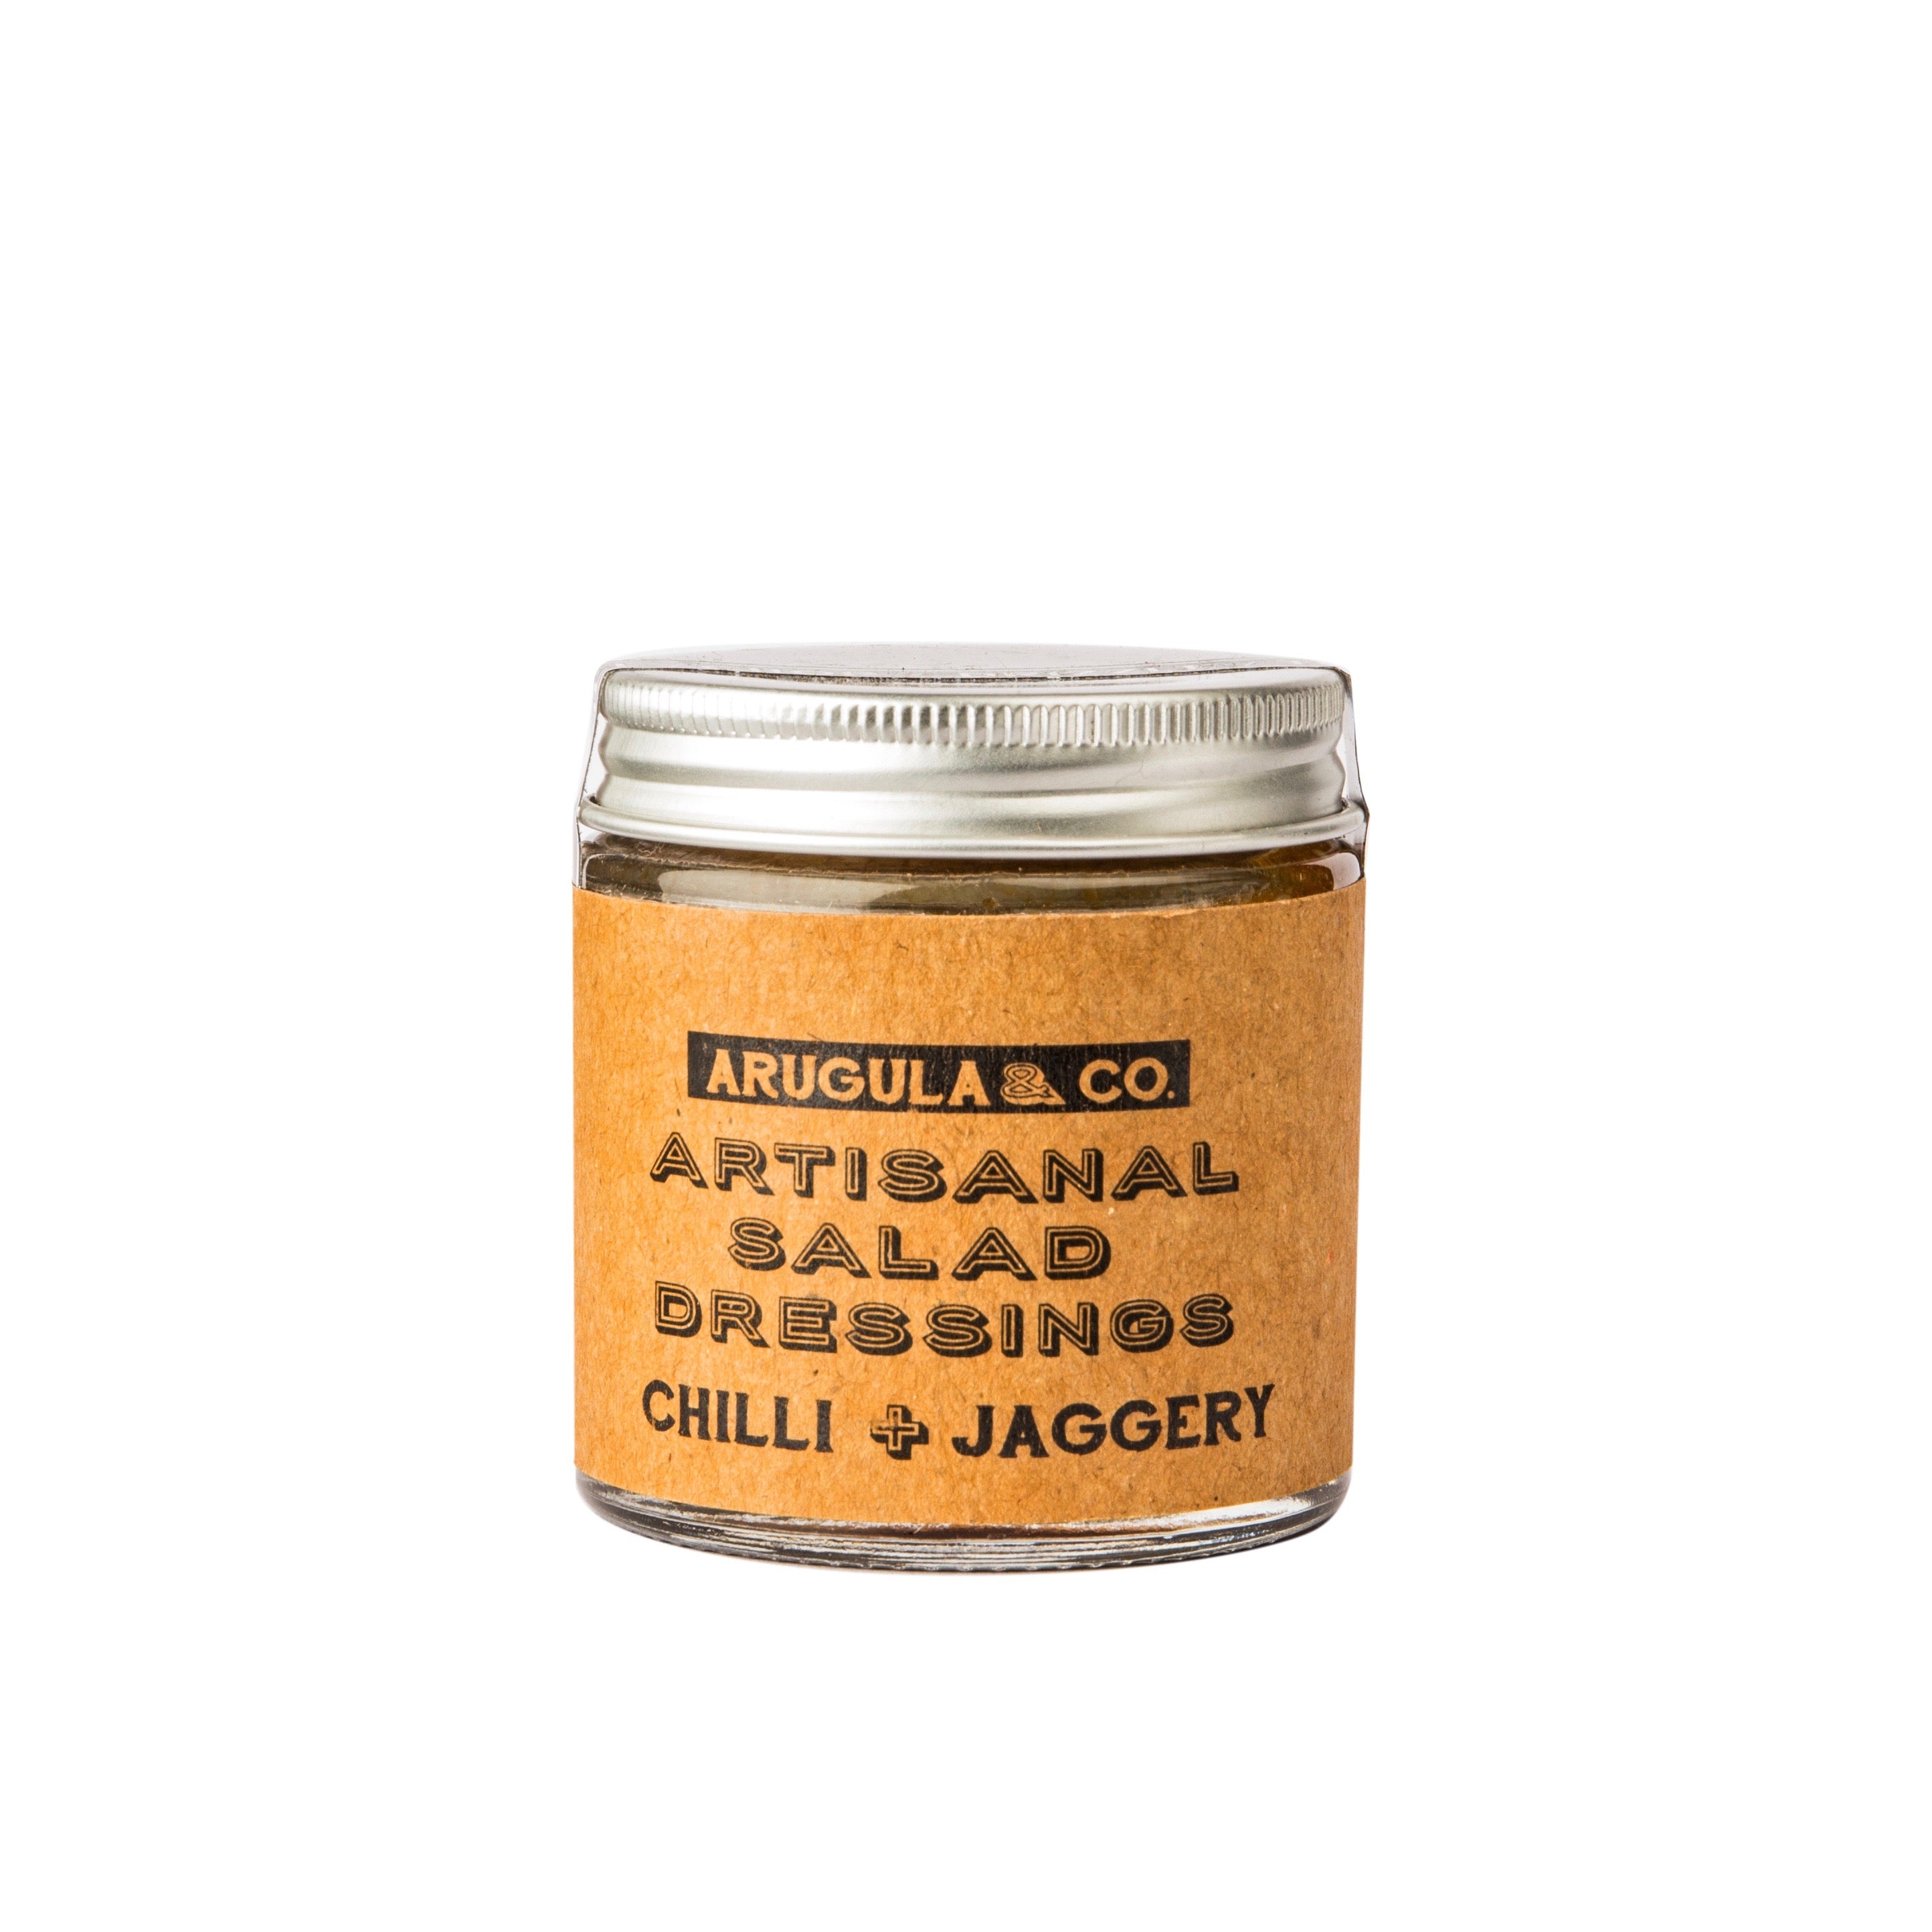 CHILLI + JAGGERY (120ml) <br/> Spicy, Sweet, Umame